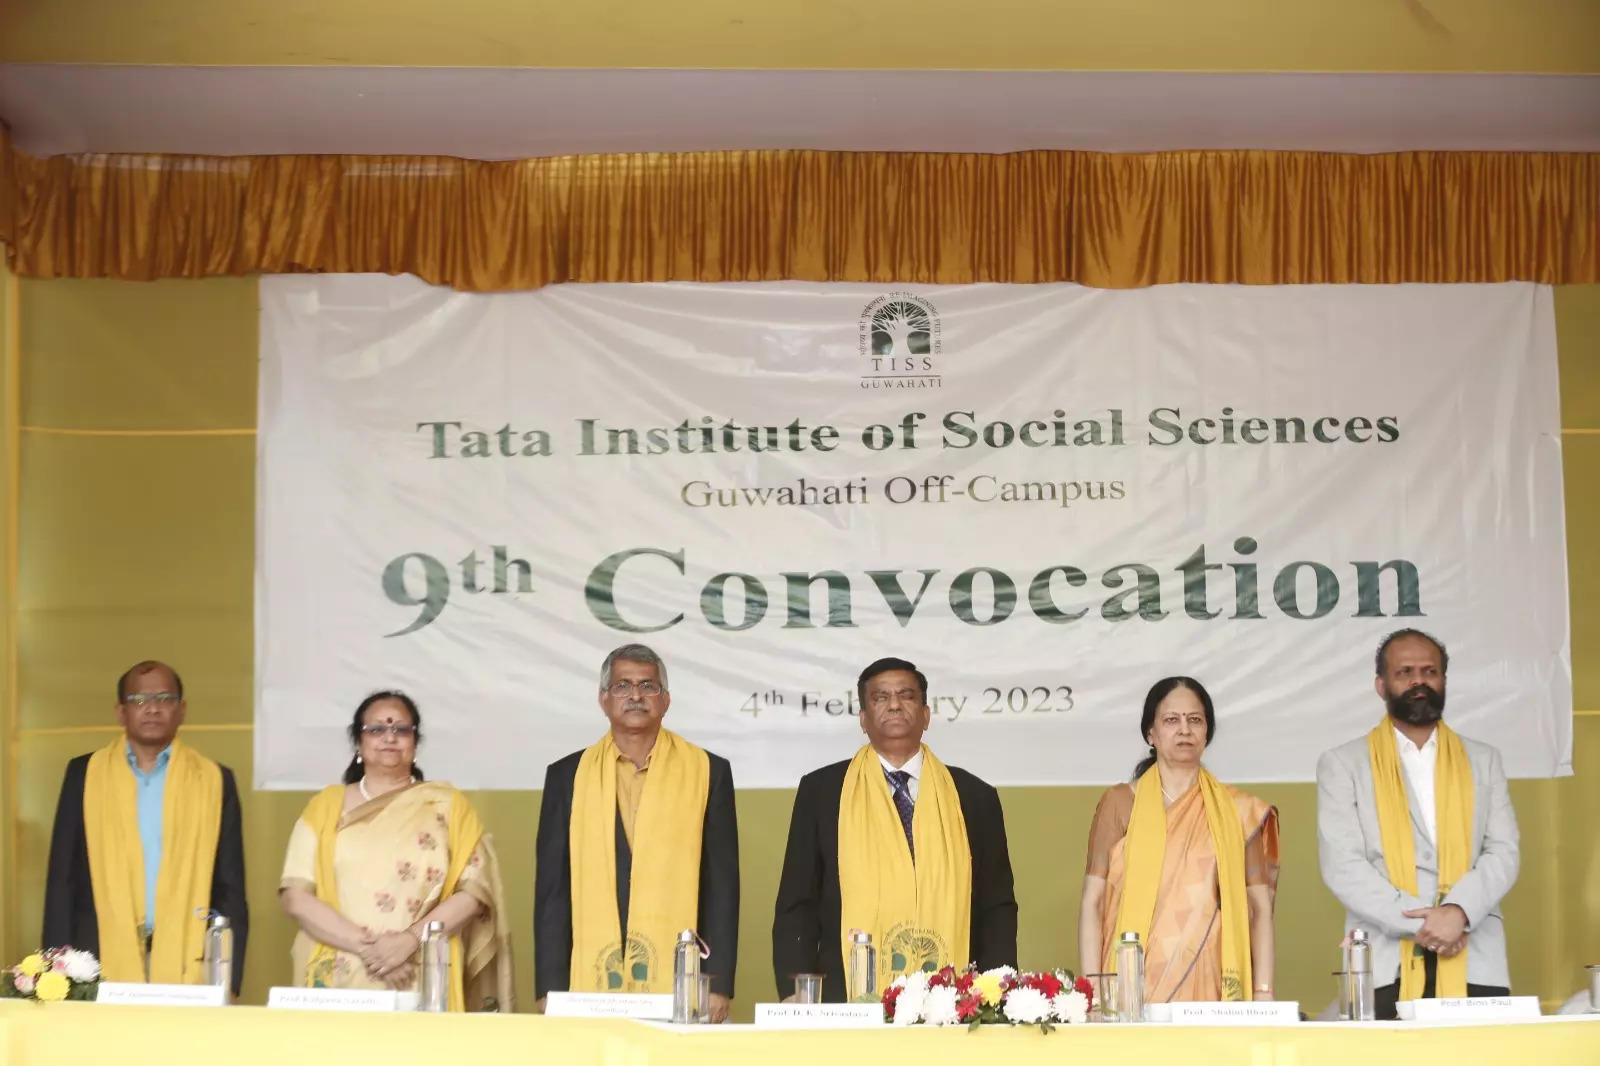 TISS Convocation 2023: UGC vice-chairman Srivastava praises students for their perseverance during the pandemic